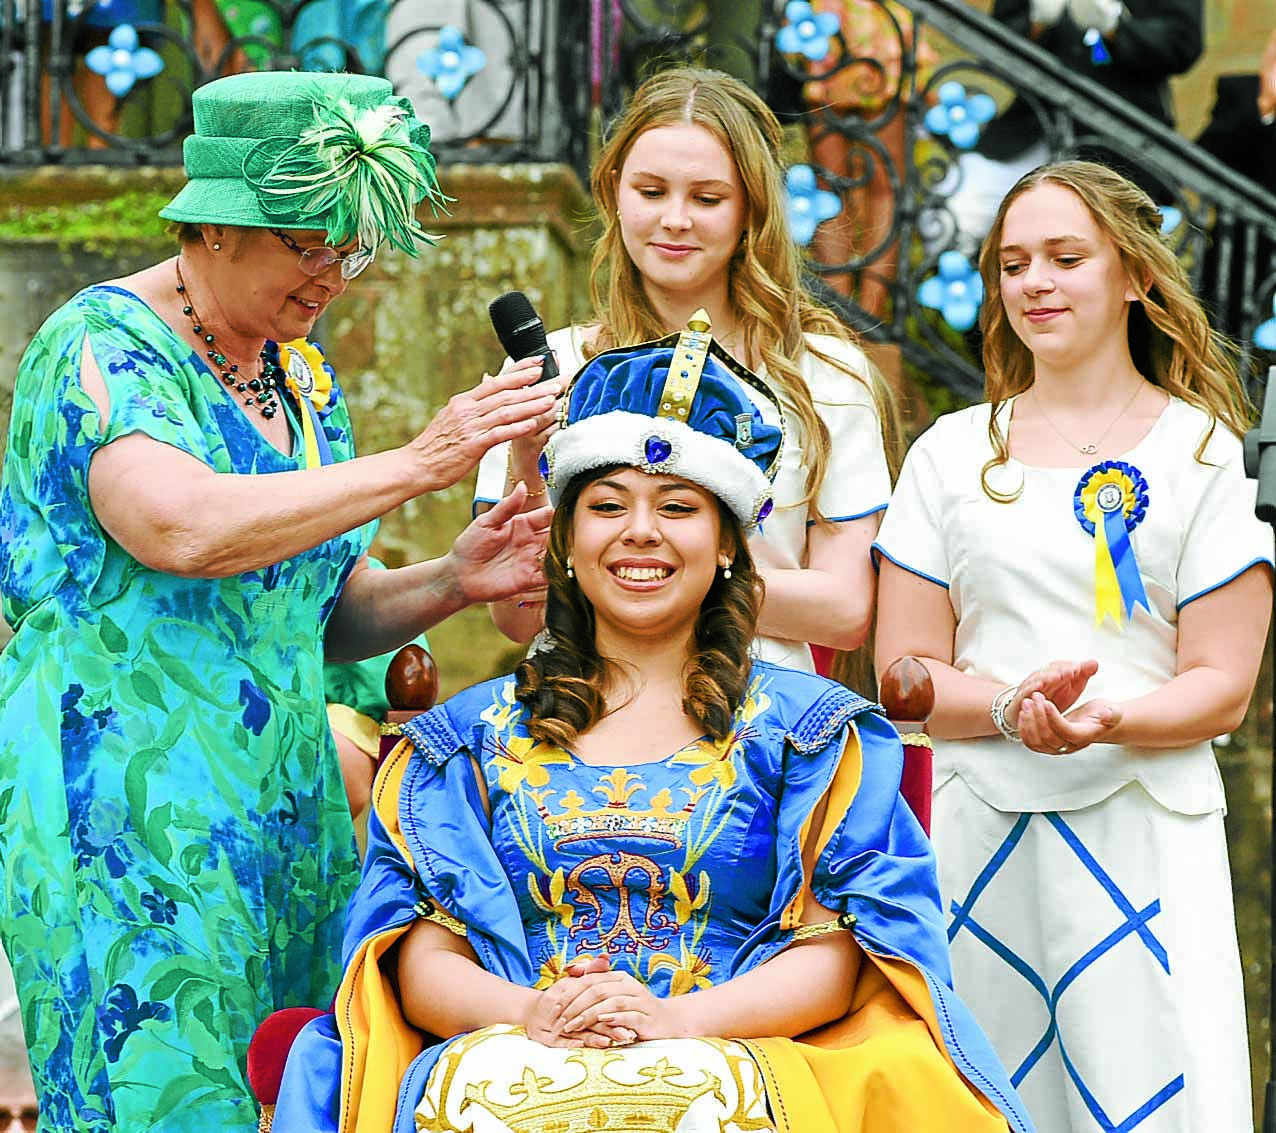 Region to celebrate young gala royalty